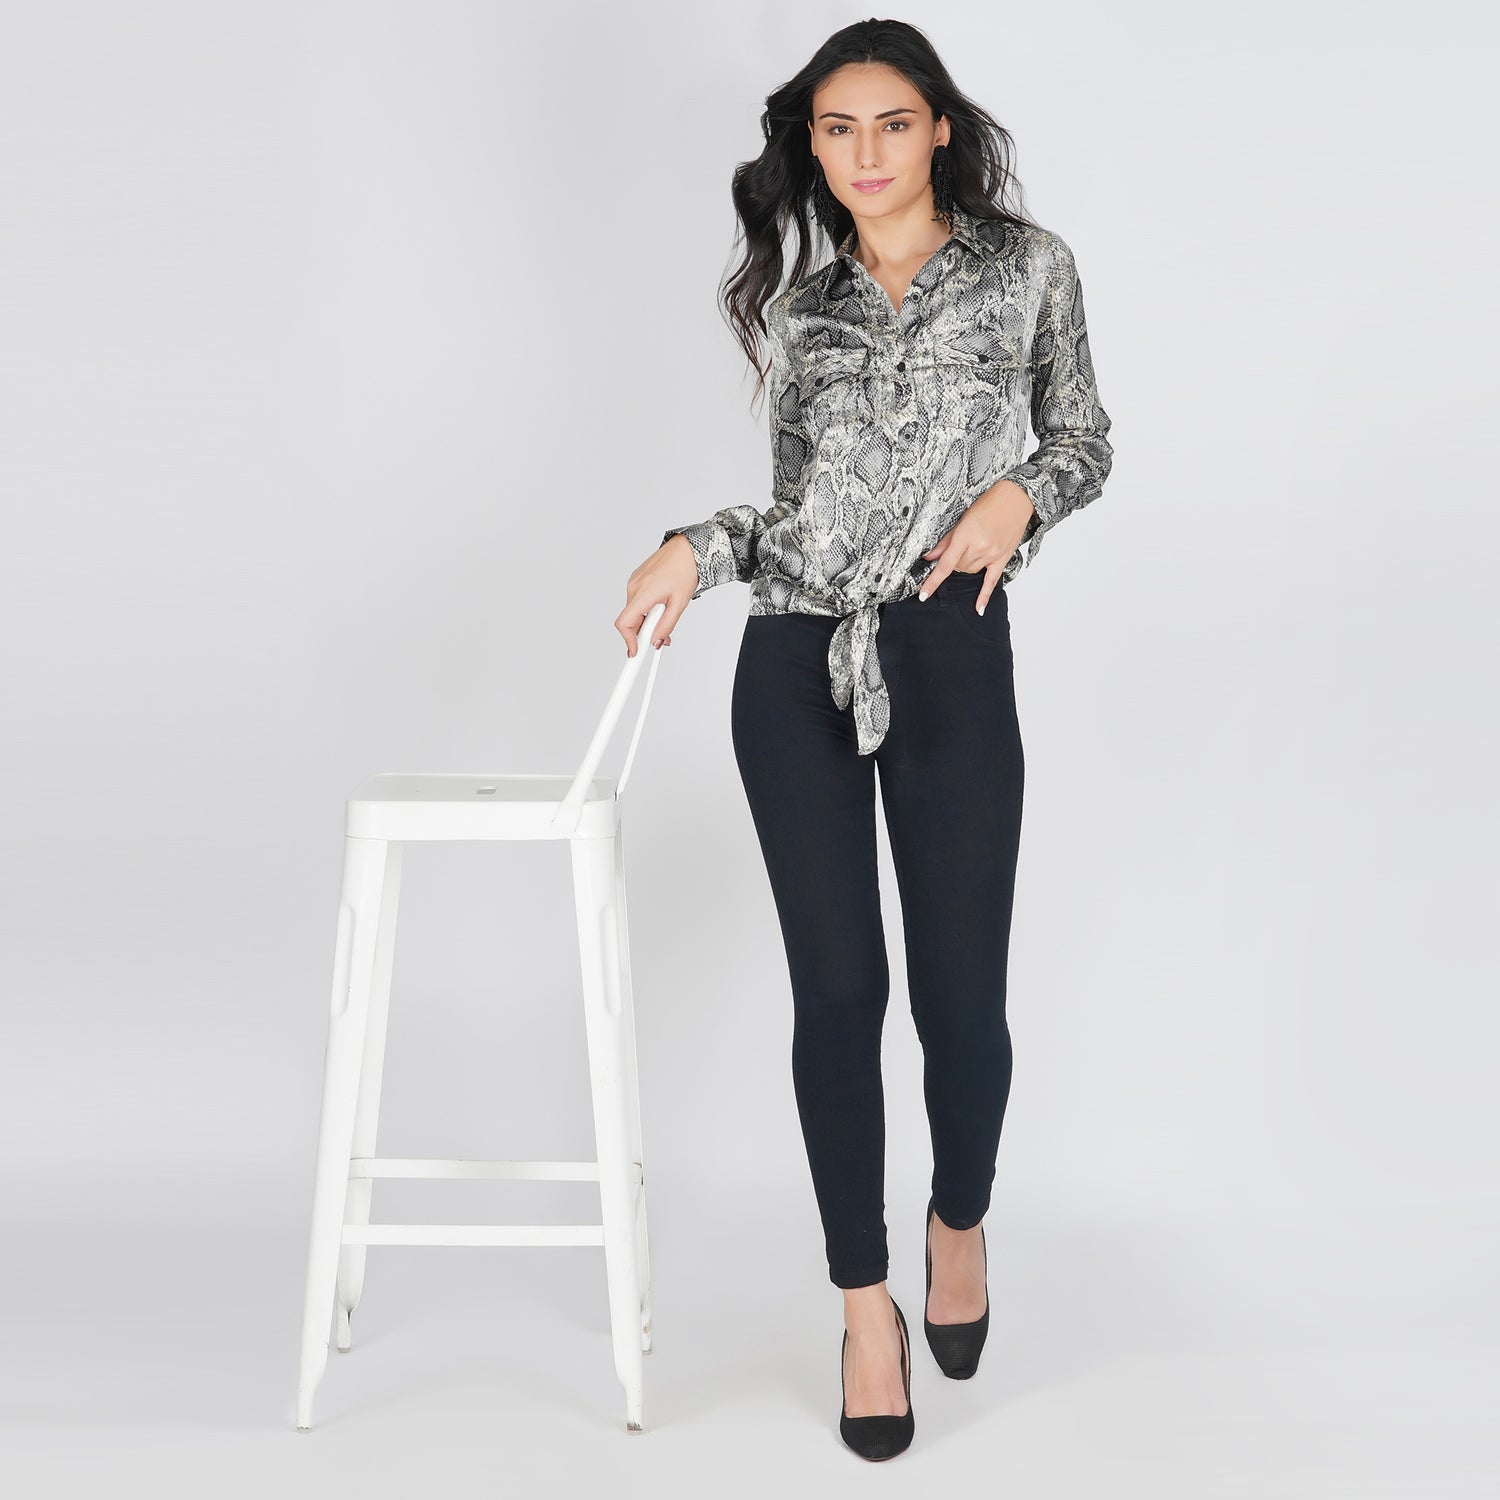 SLAY. Women's Animal Print Shirt with Front Tie Knot & Roll Up Sleeves-clothing-to-slay.myshopify.com-Snake Print Shirt